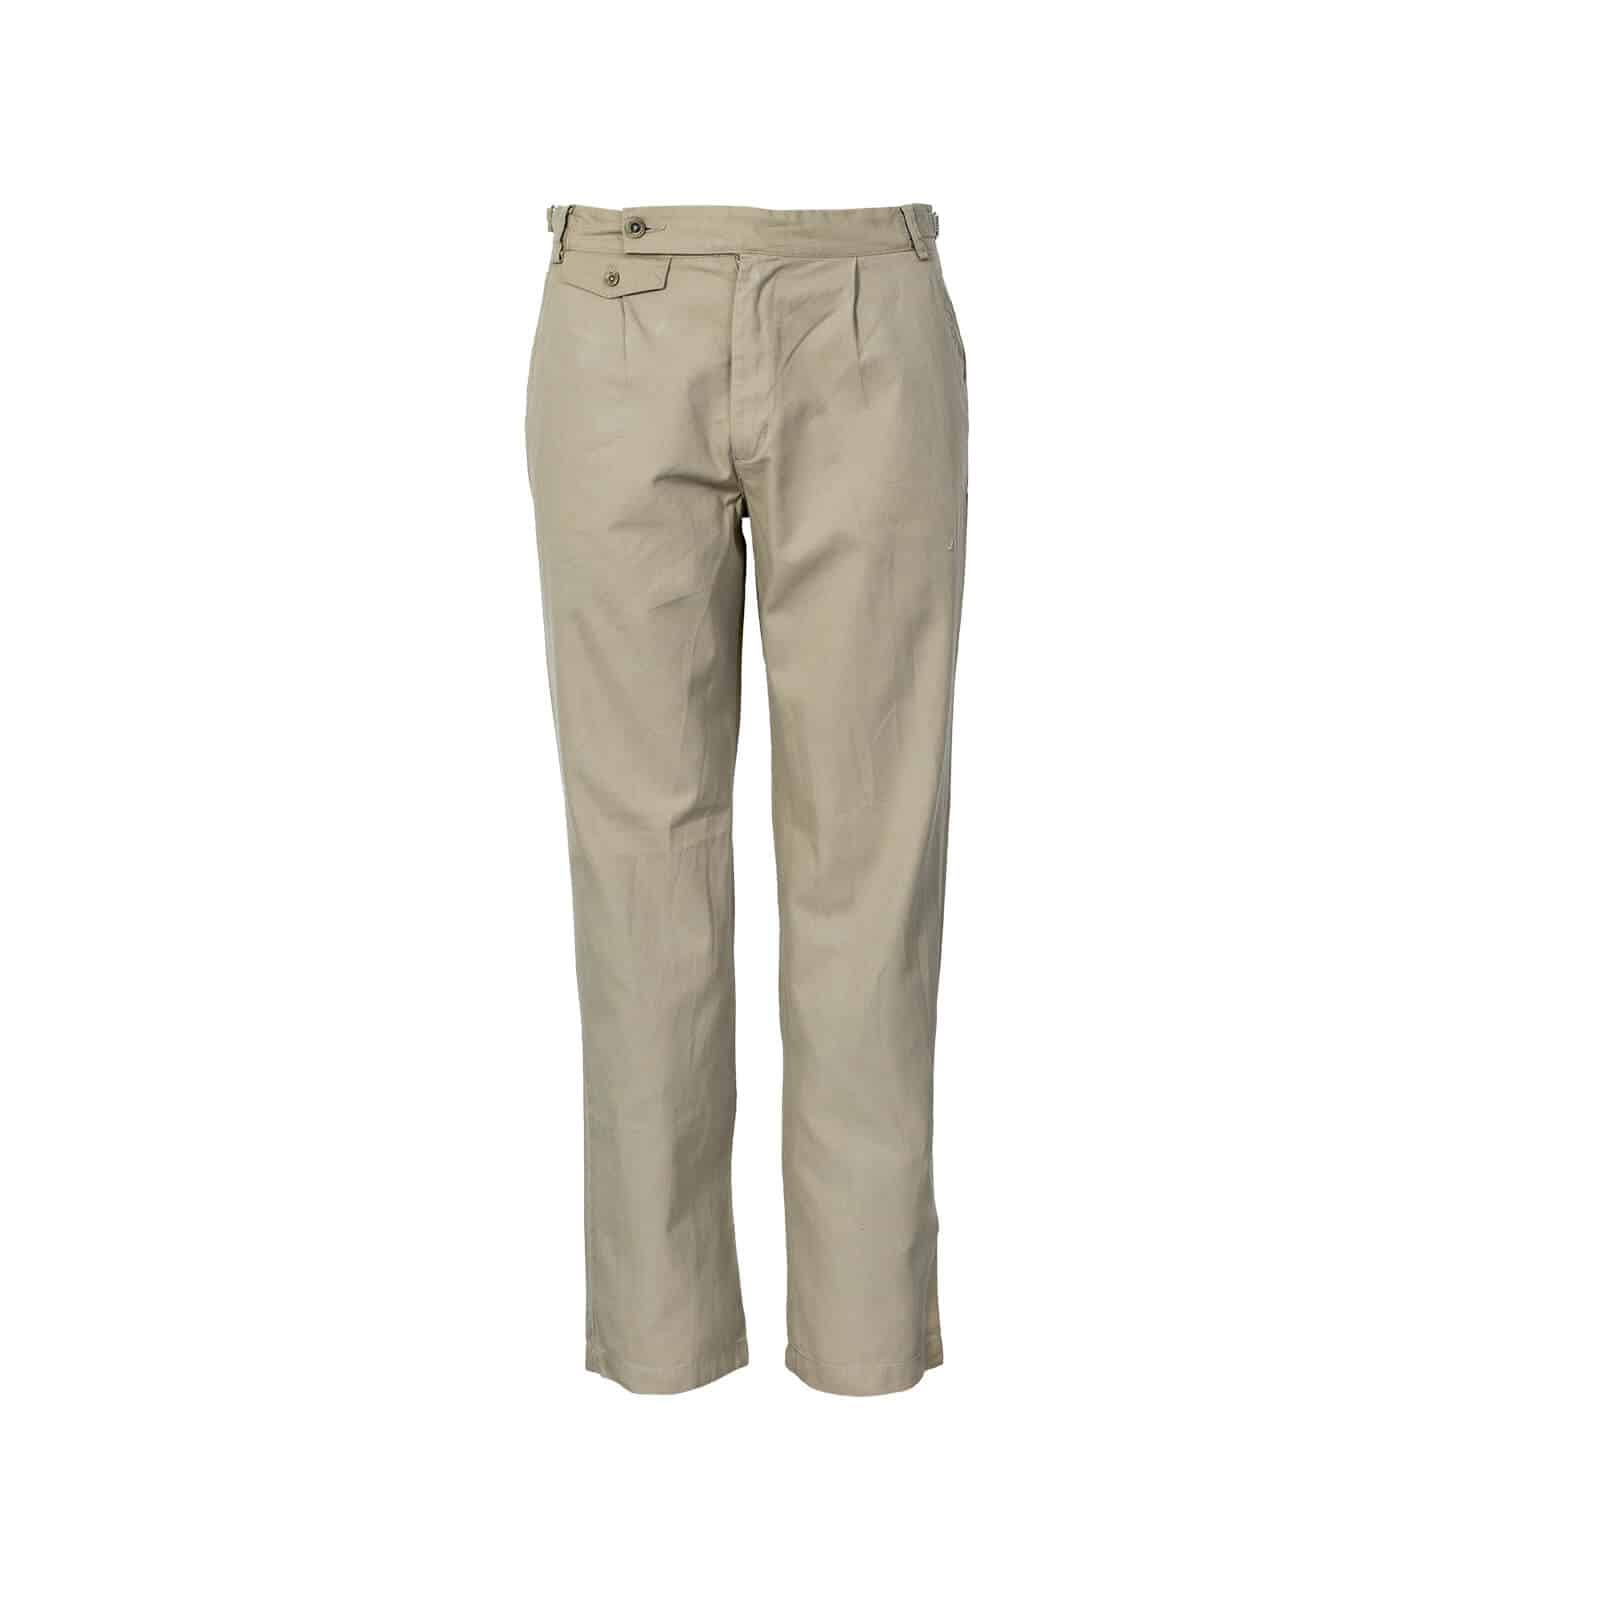 Khaki Field Trouser - Dirt Road Outfitters